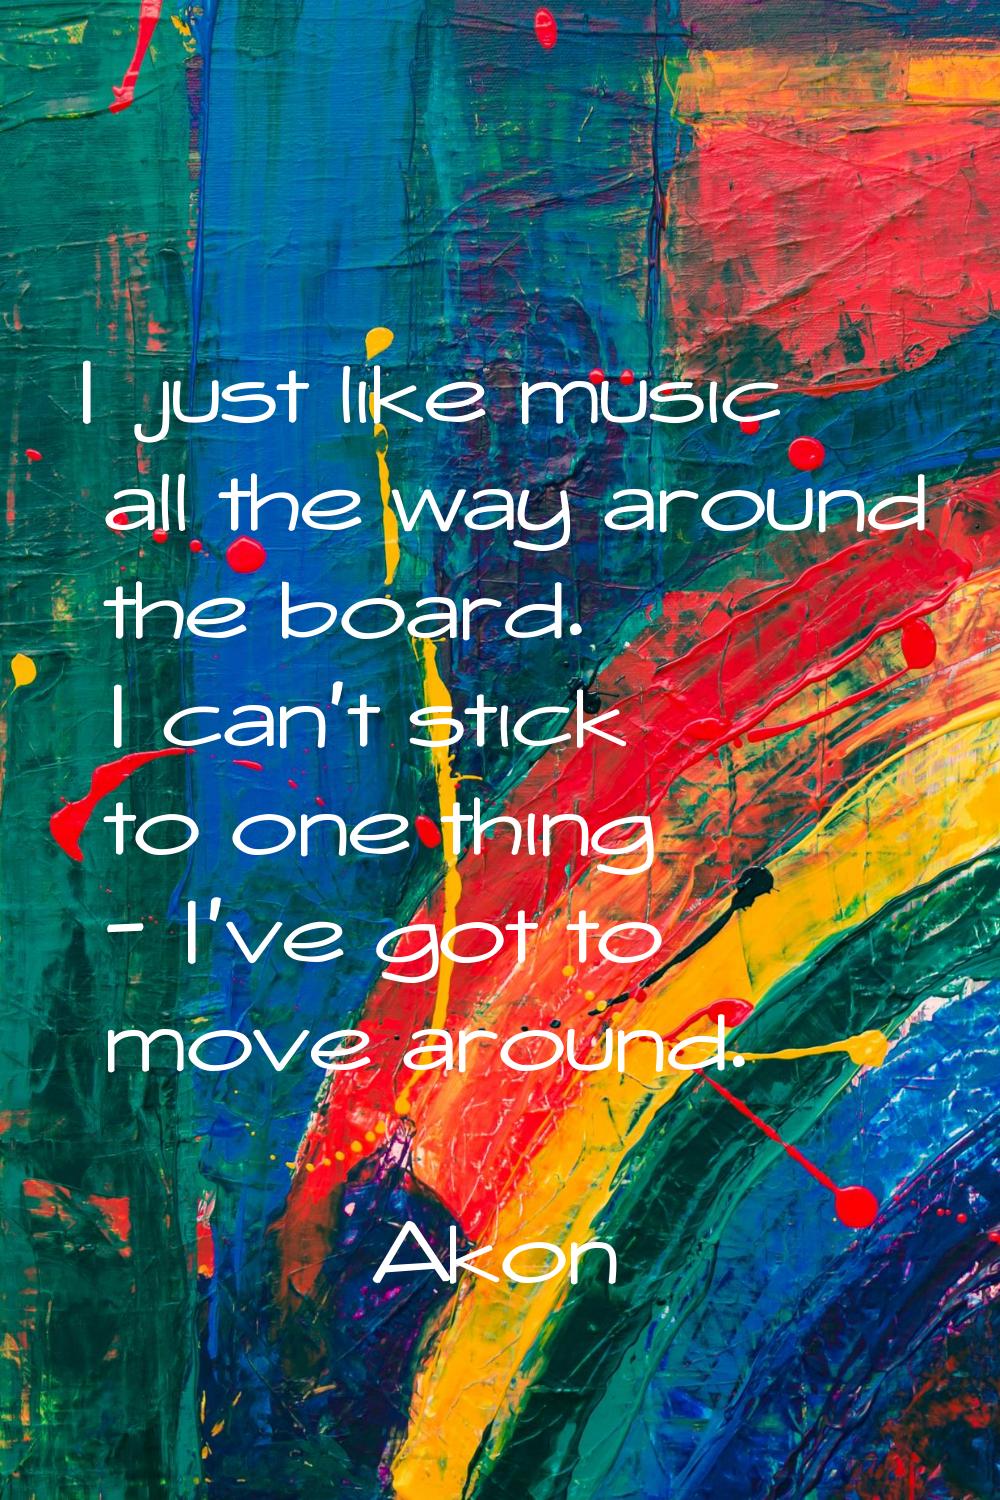 I just like music all the way around the board. I can't stick to one thing - I've got to move aroun